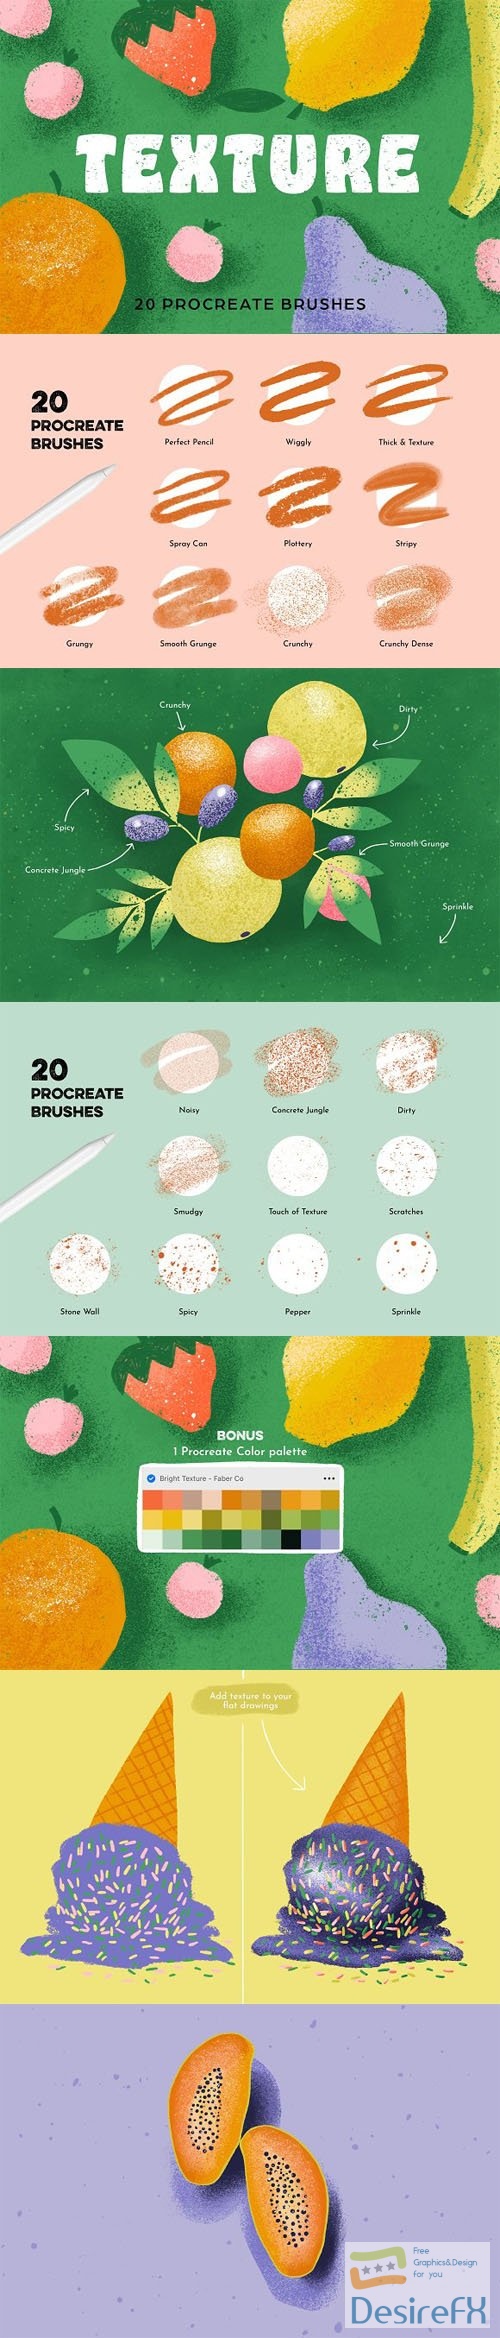 20 Texture Brushes for Procreate